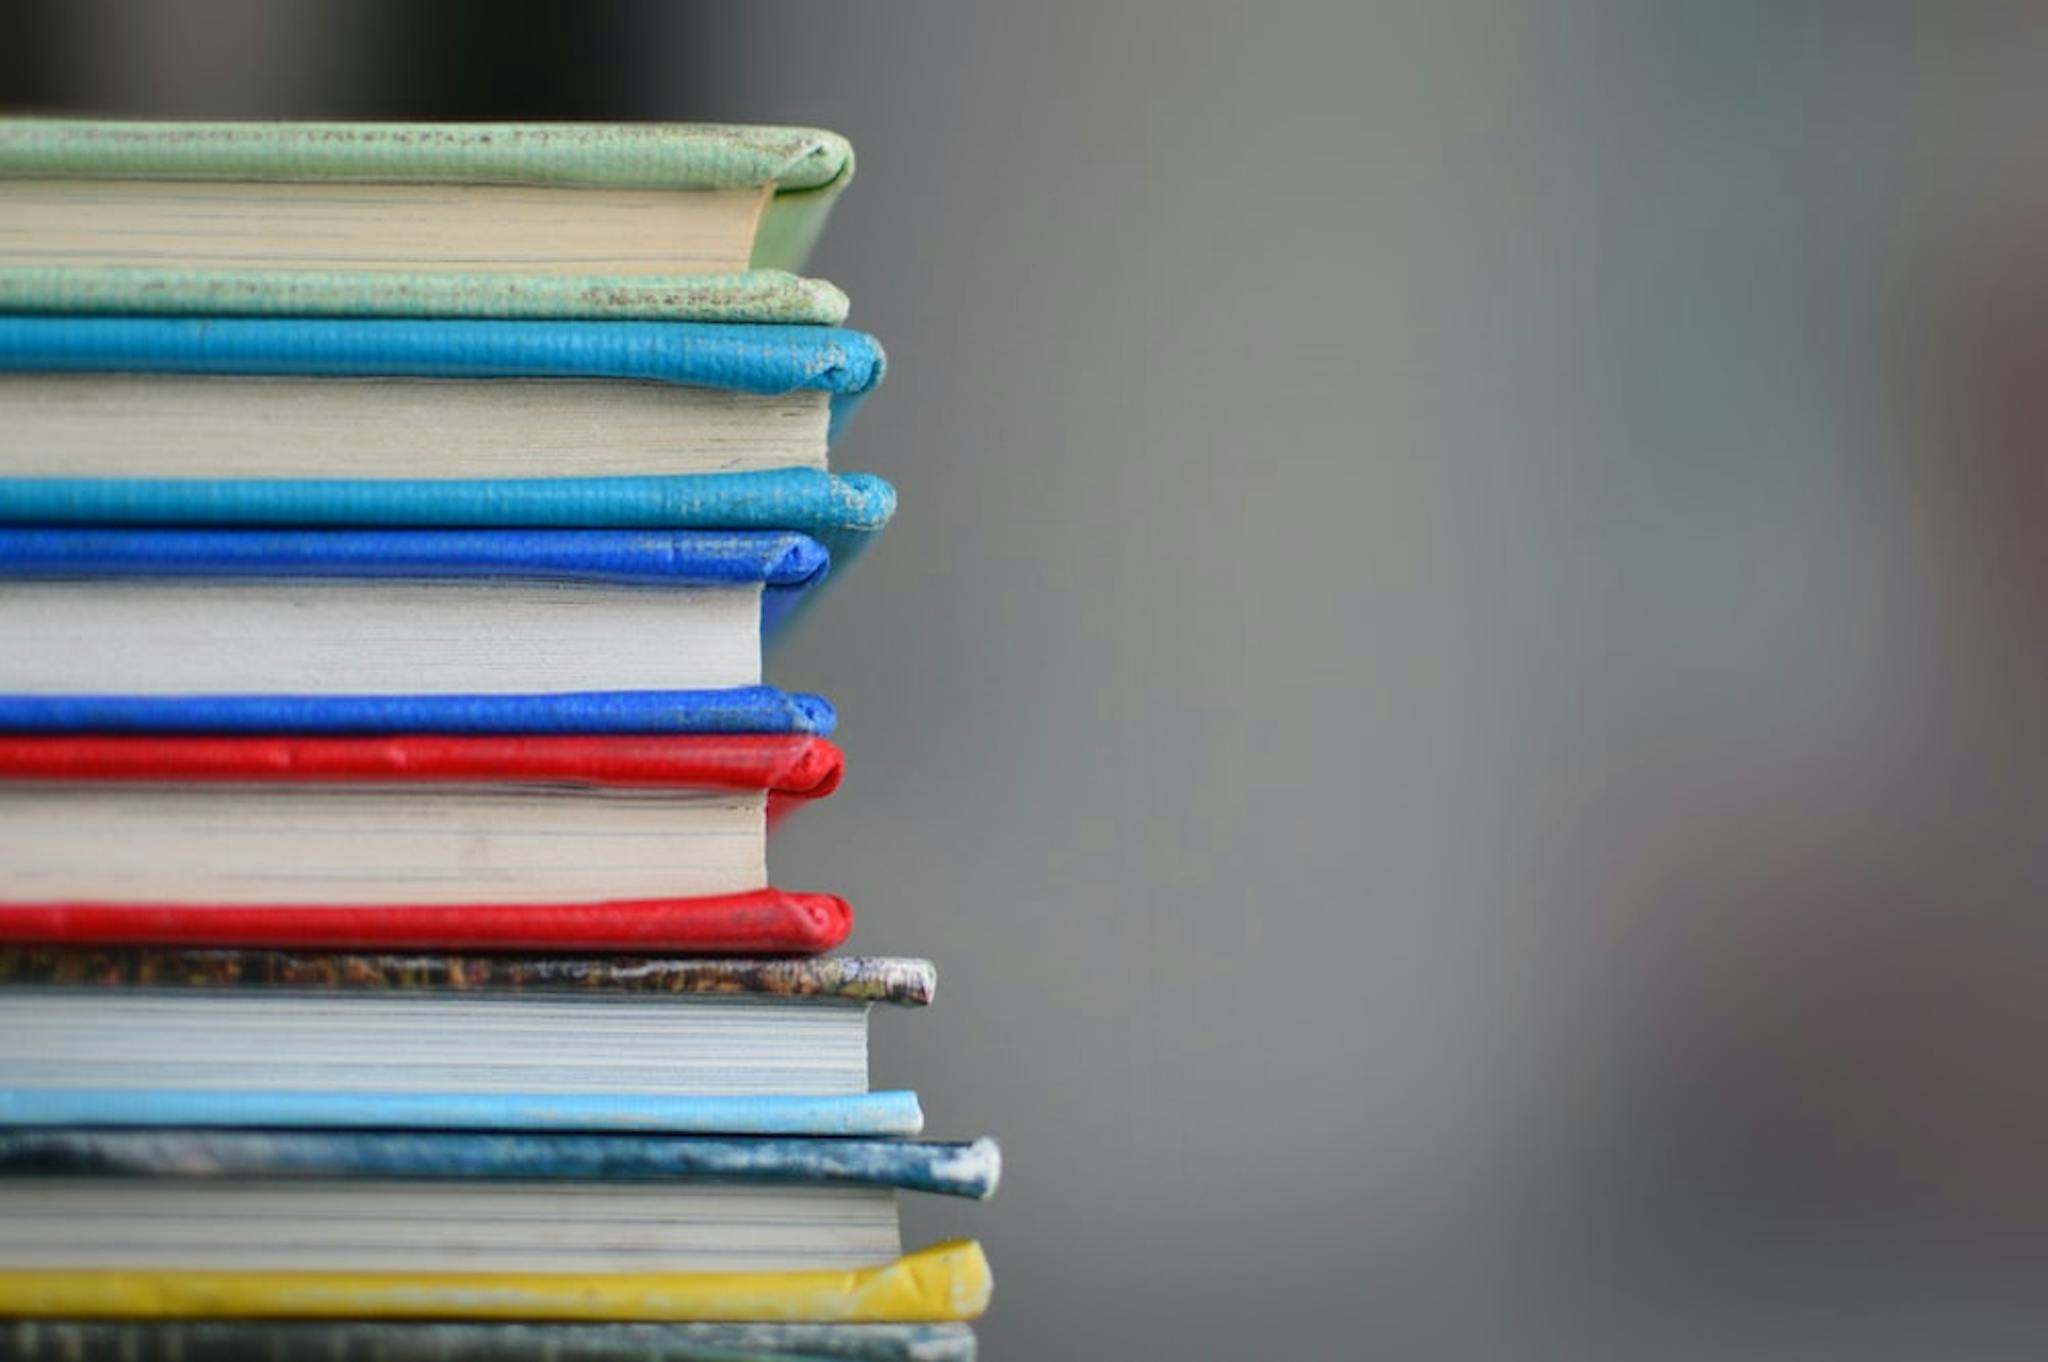 Shallow-focus photography of books